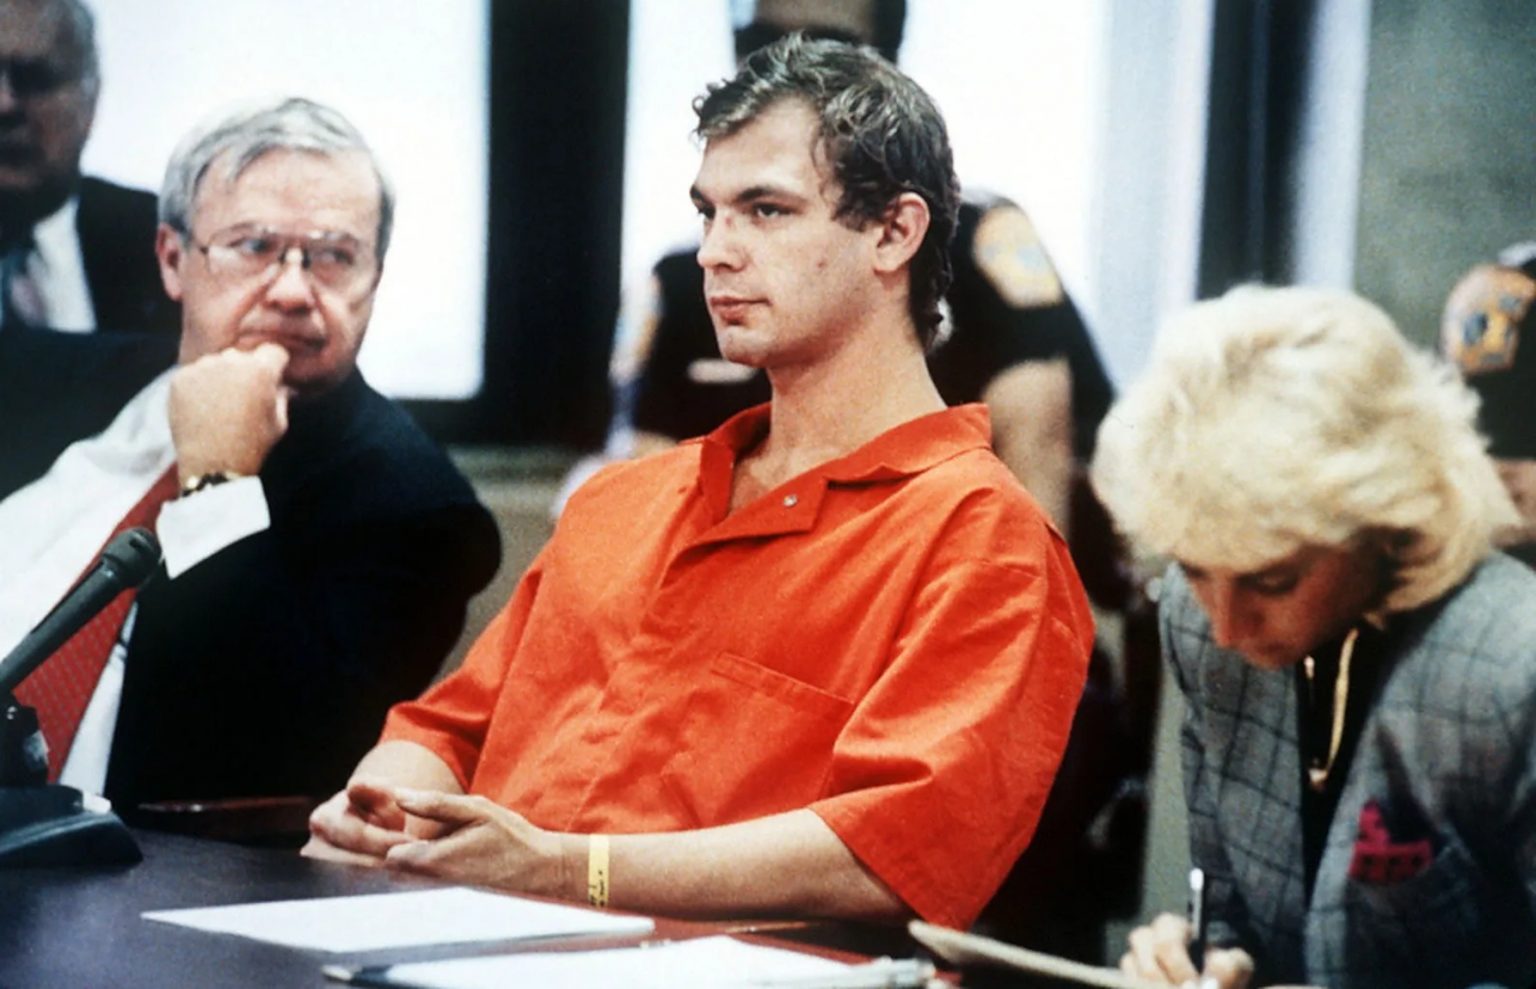 18 Jeffrey Dahmer Facts About The Notorious Serial Killer - Facts.net